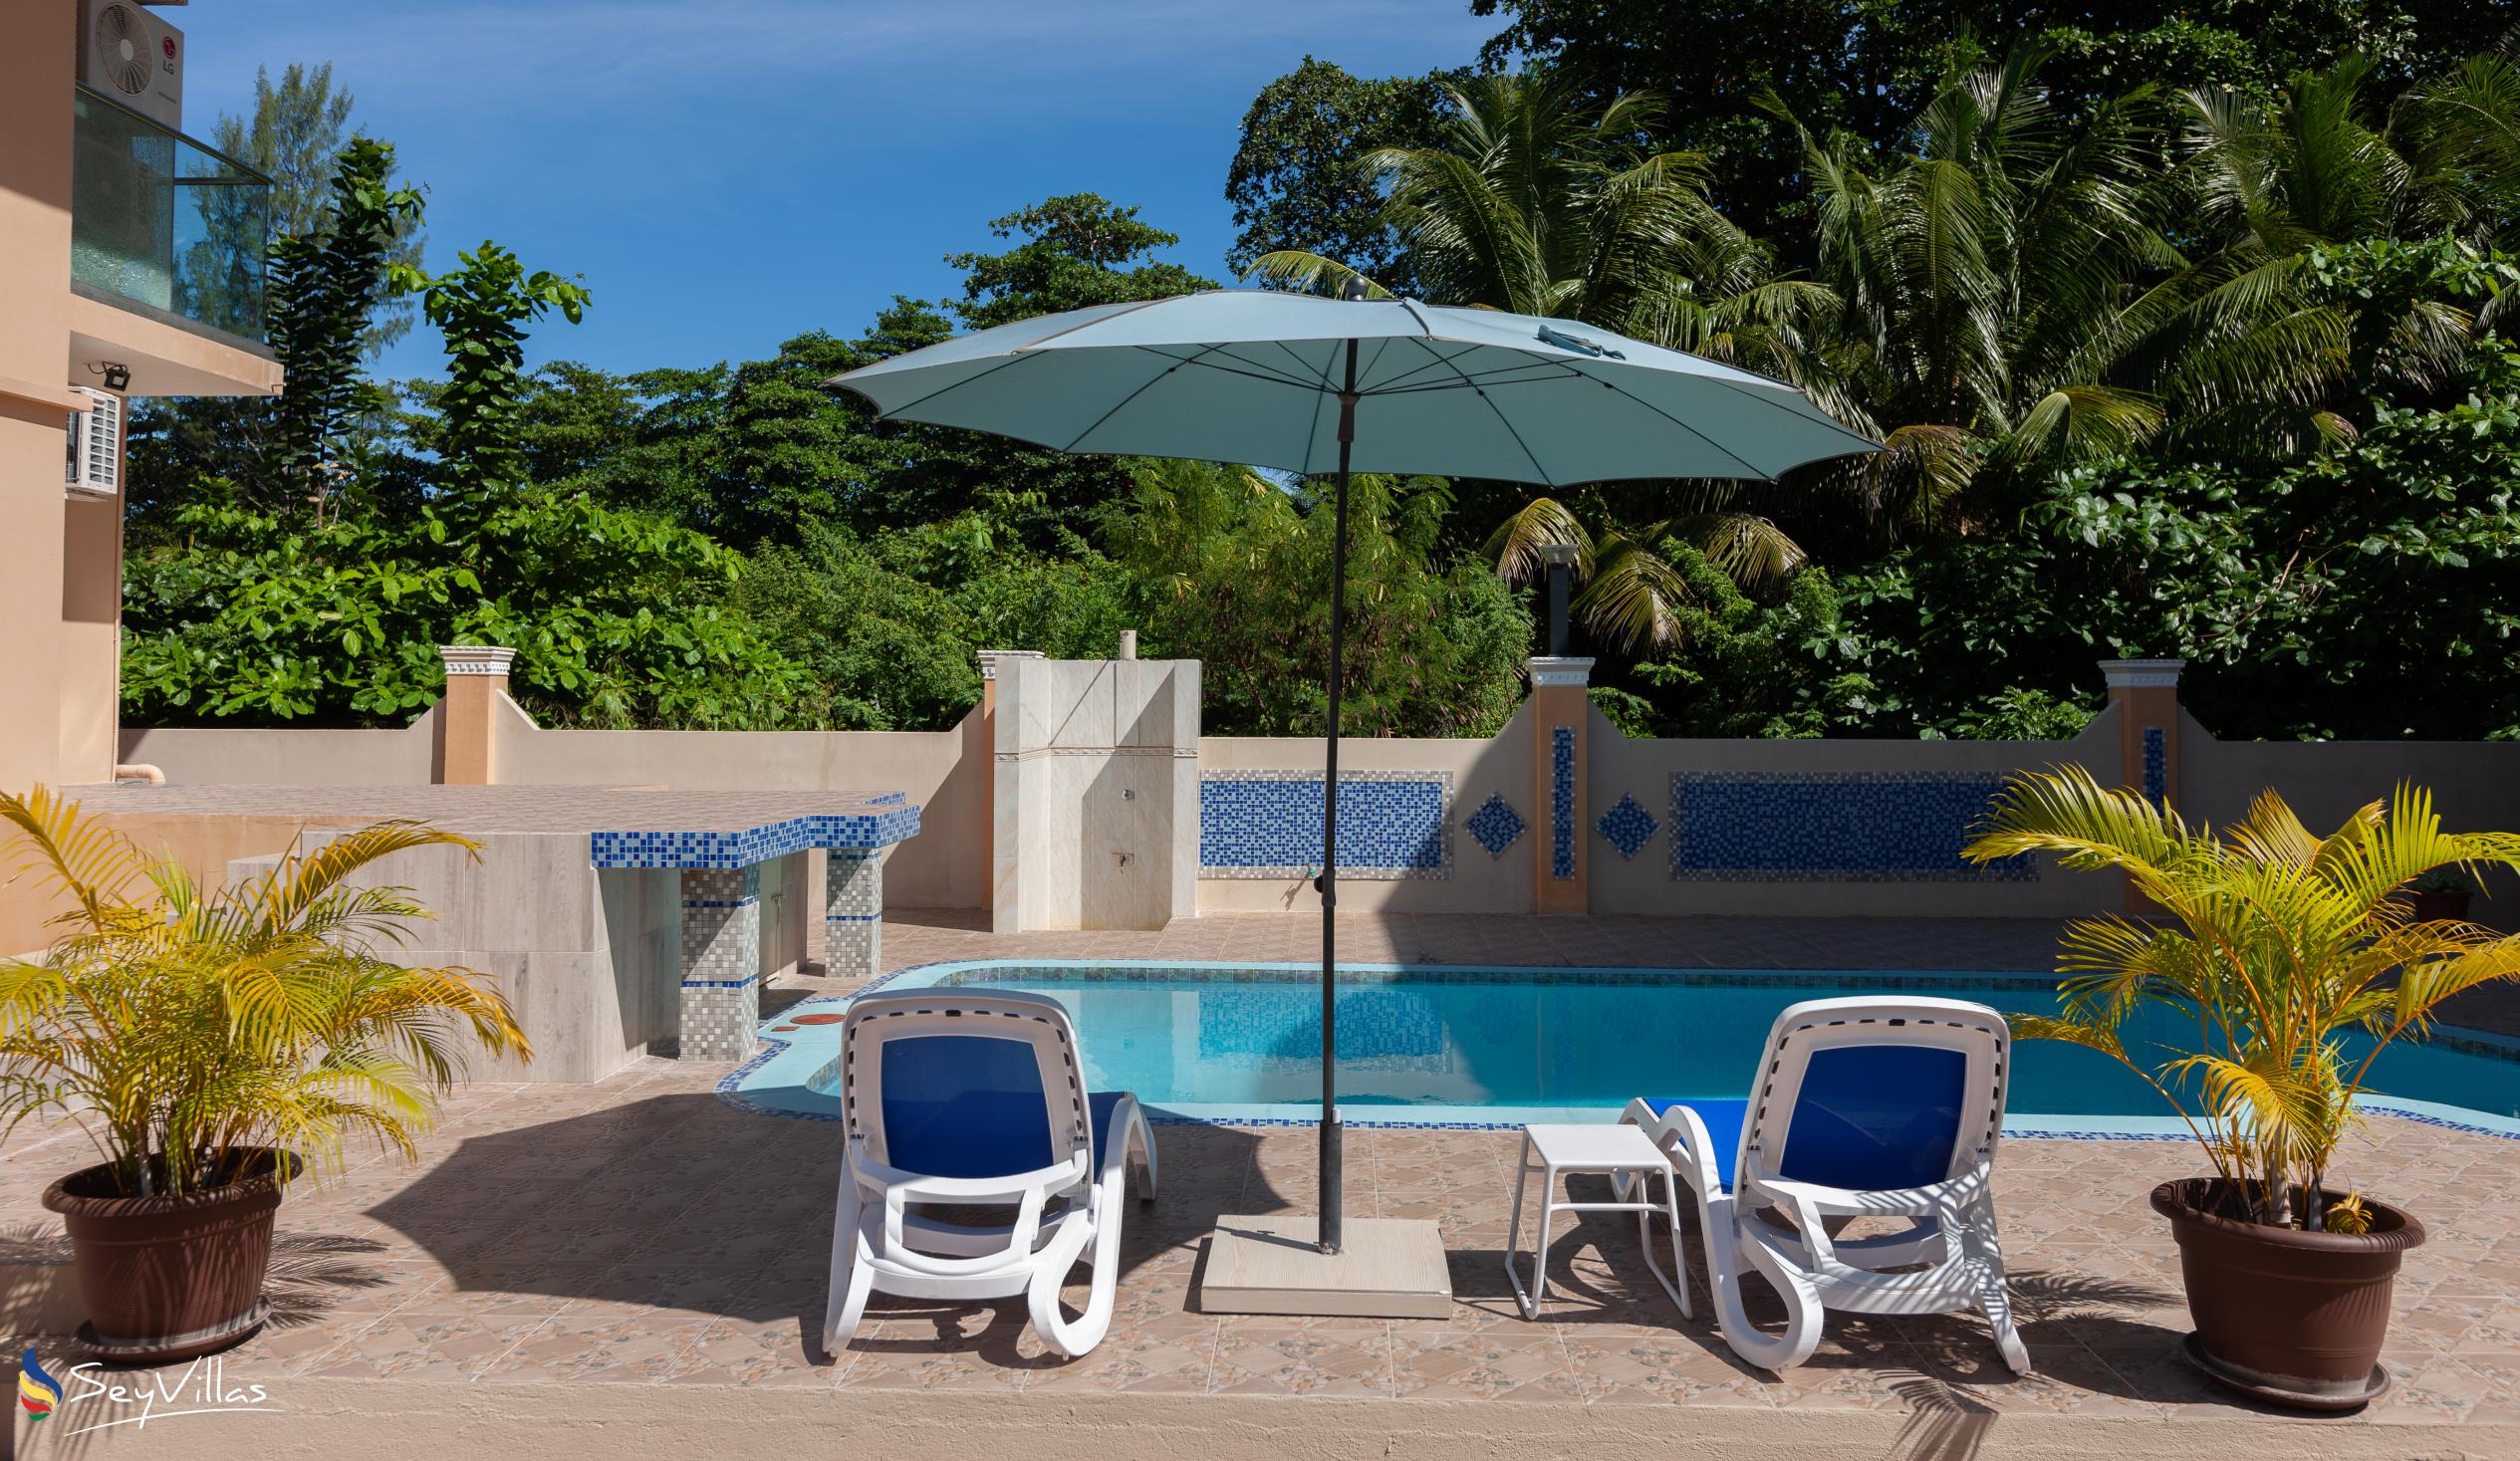 Photo 3: Stone Self Catering Apartments - Outdoor area - Praslin (Seychelles)